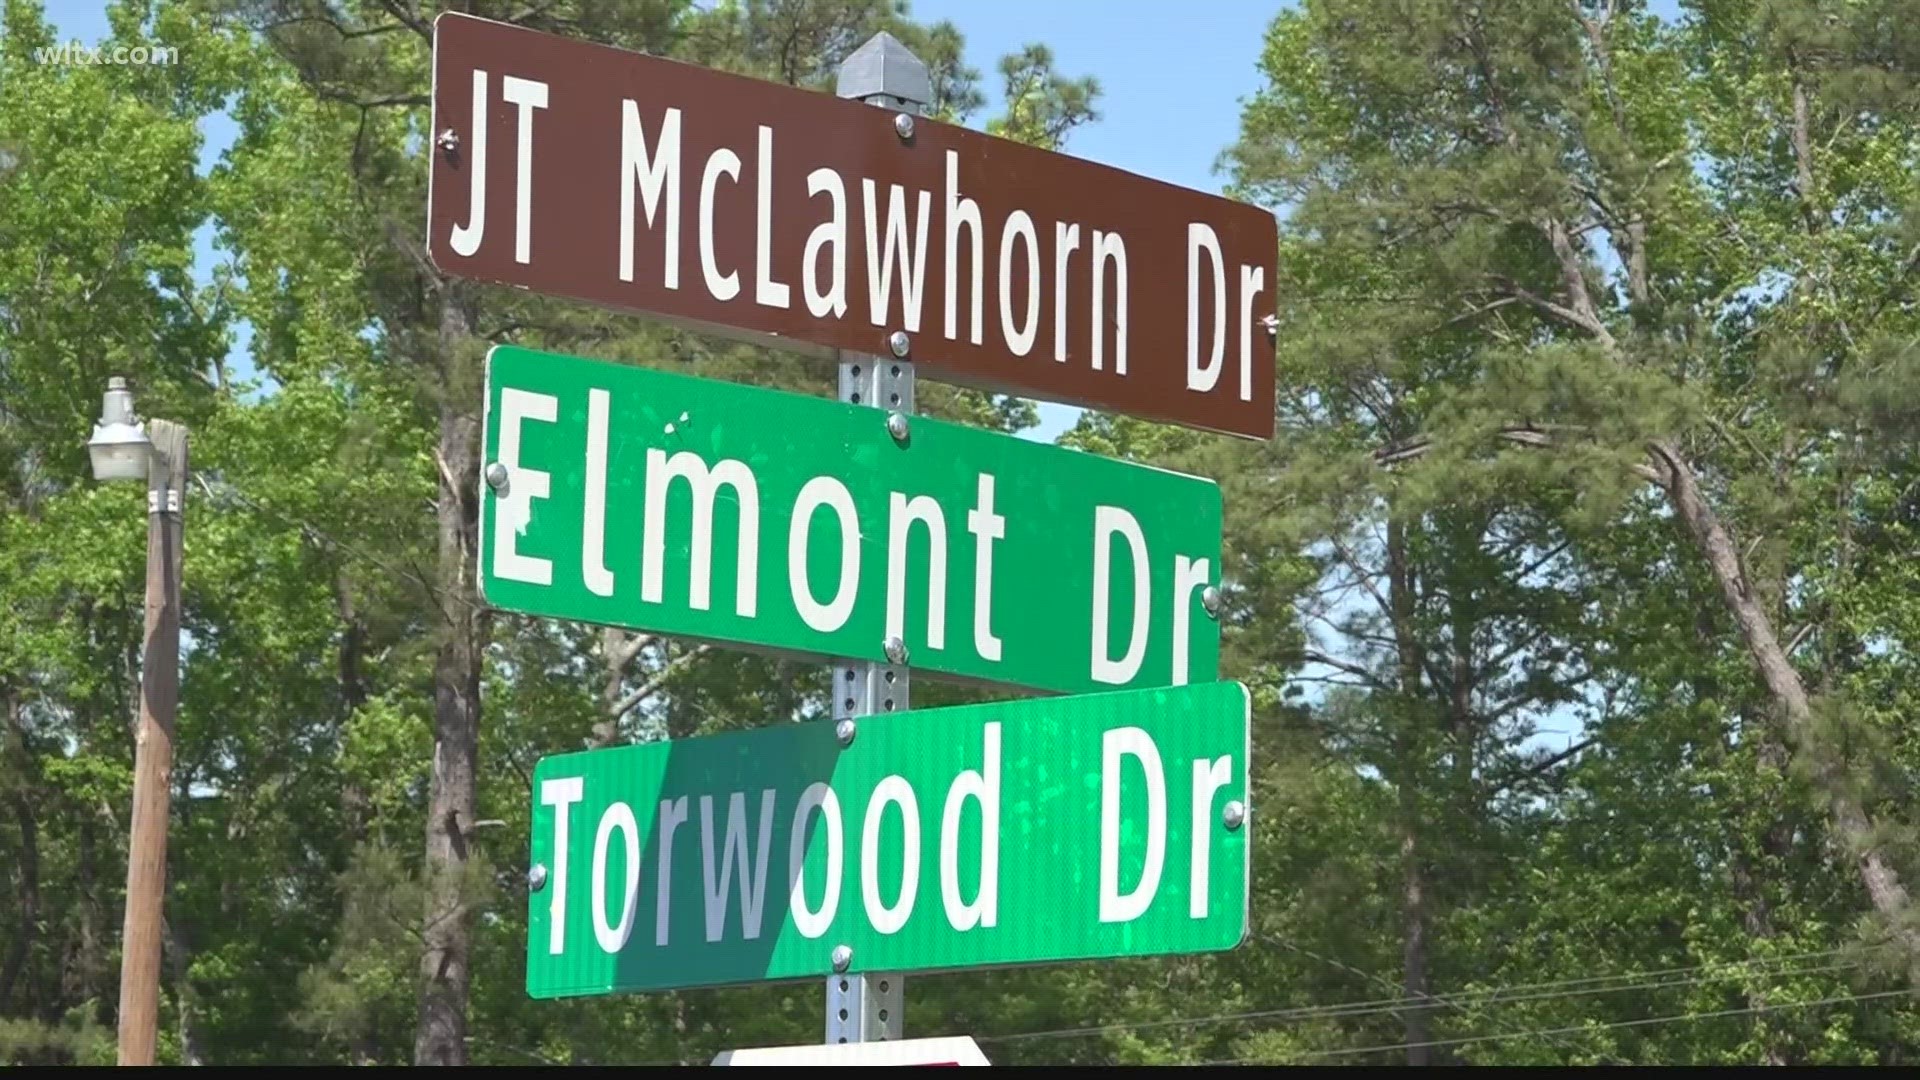 Elmont Drive in Columbia has been renamed in honor of JT McLawhorn.